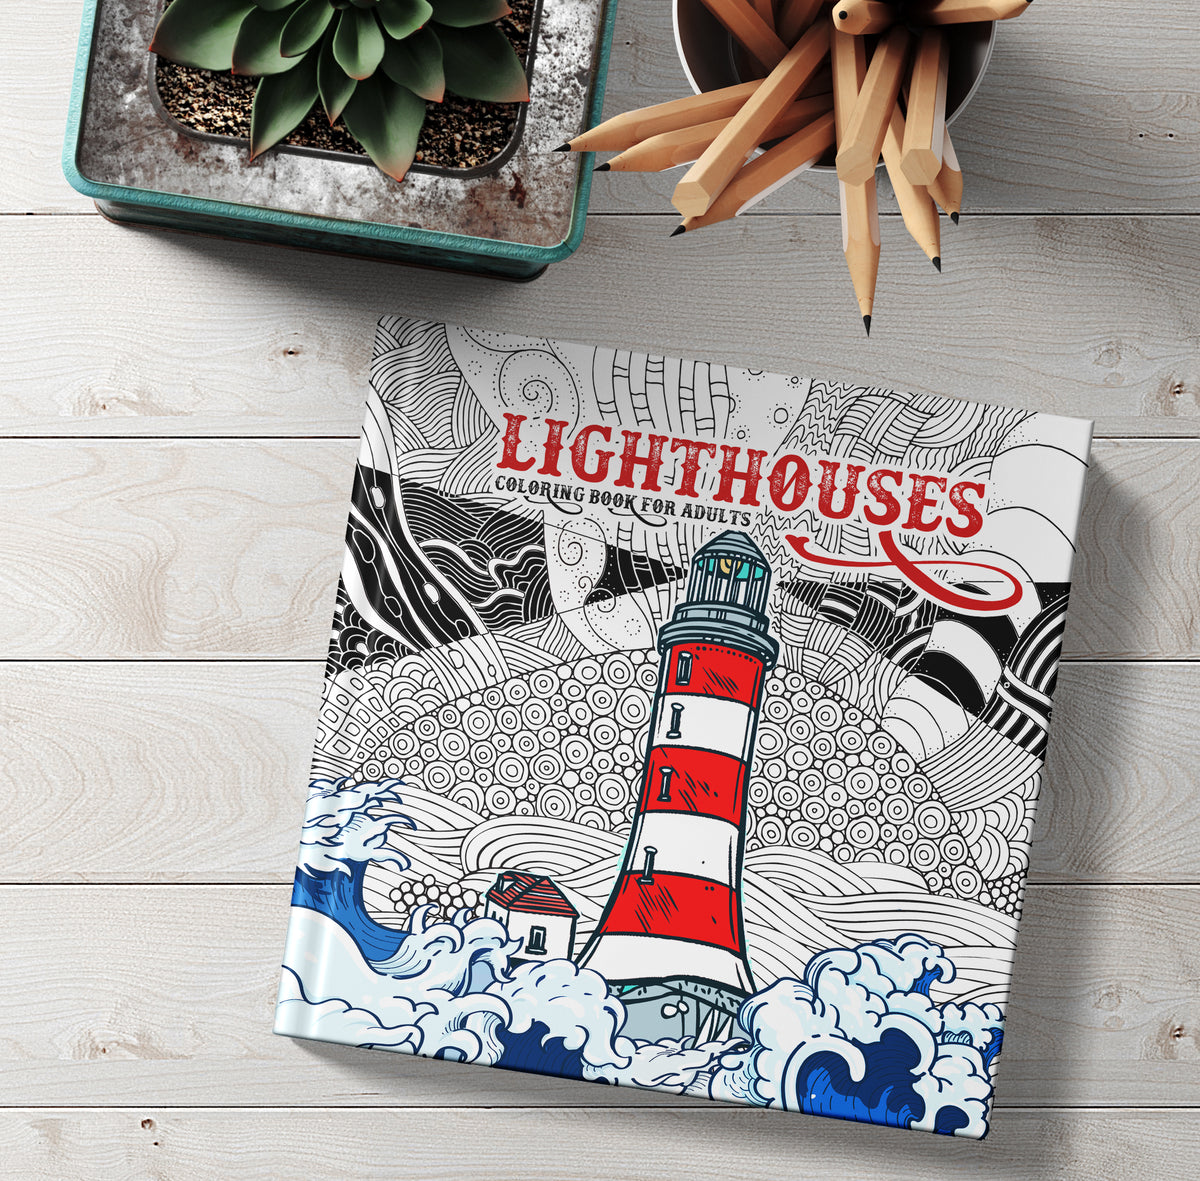 Lighthouse Spiral-Bound Coloring book for Adult to Relax and